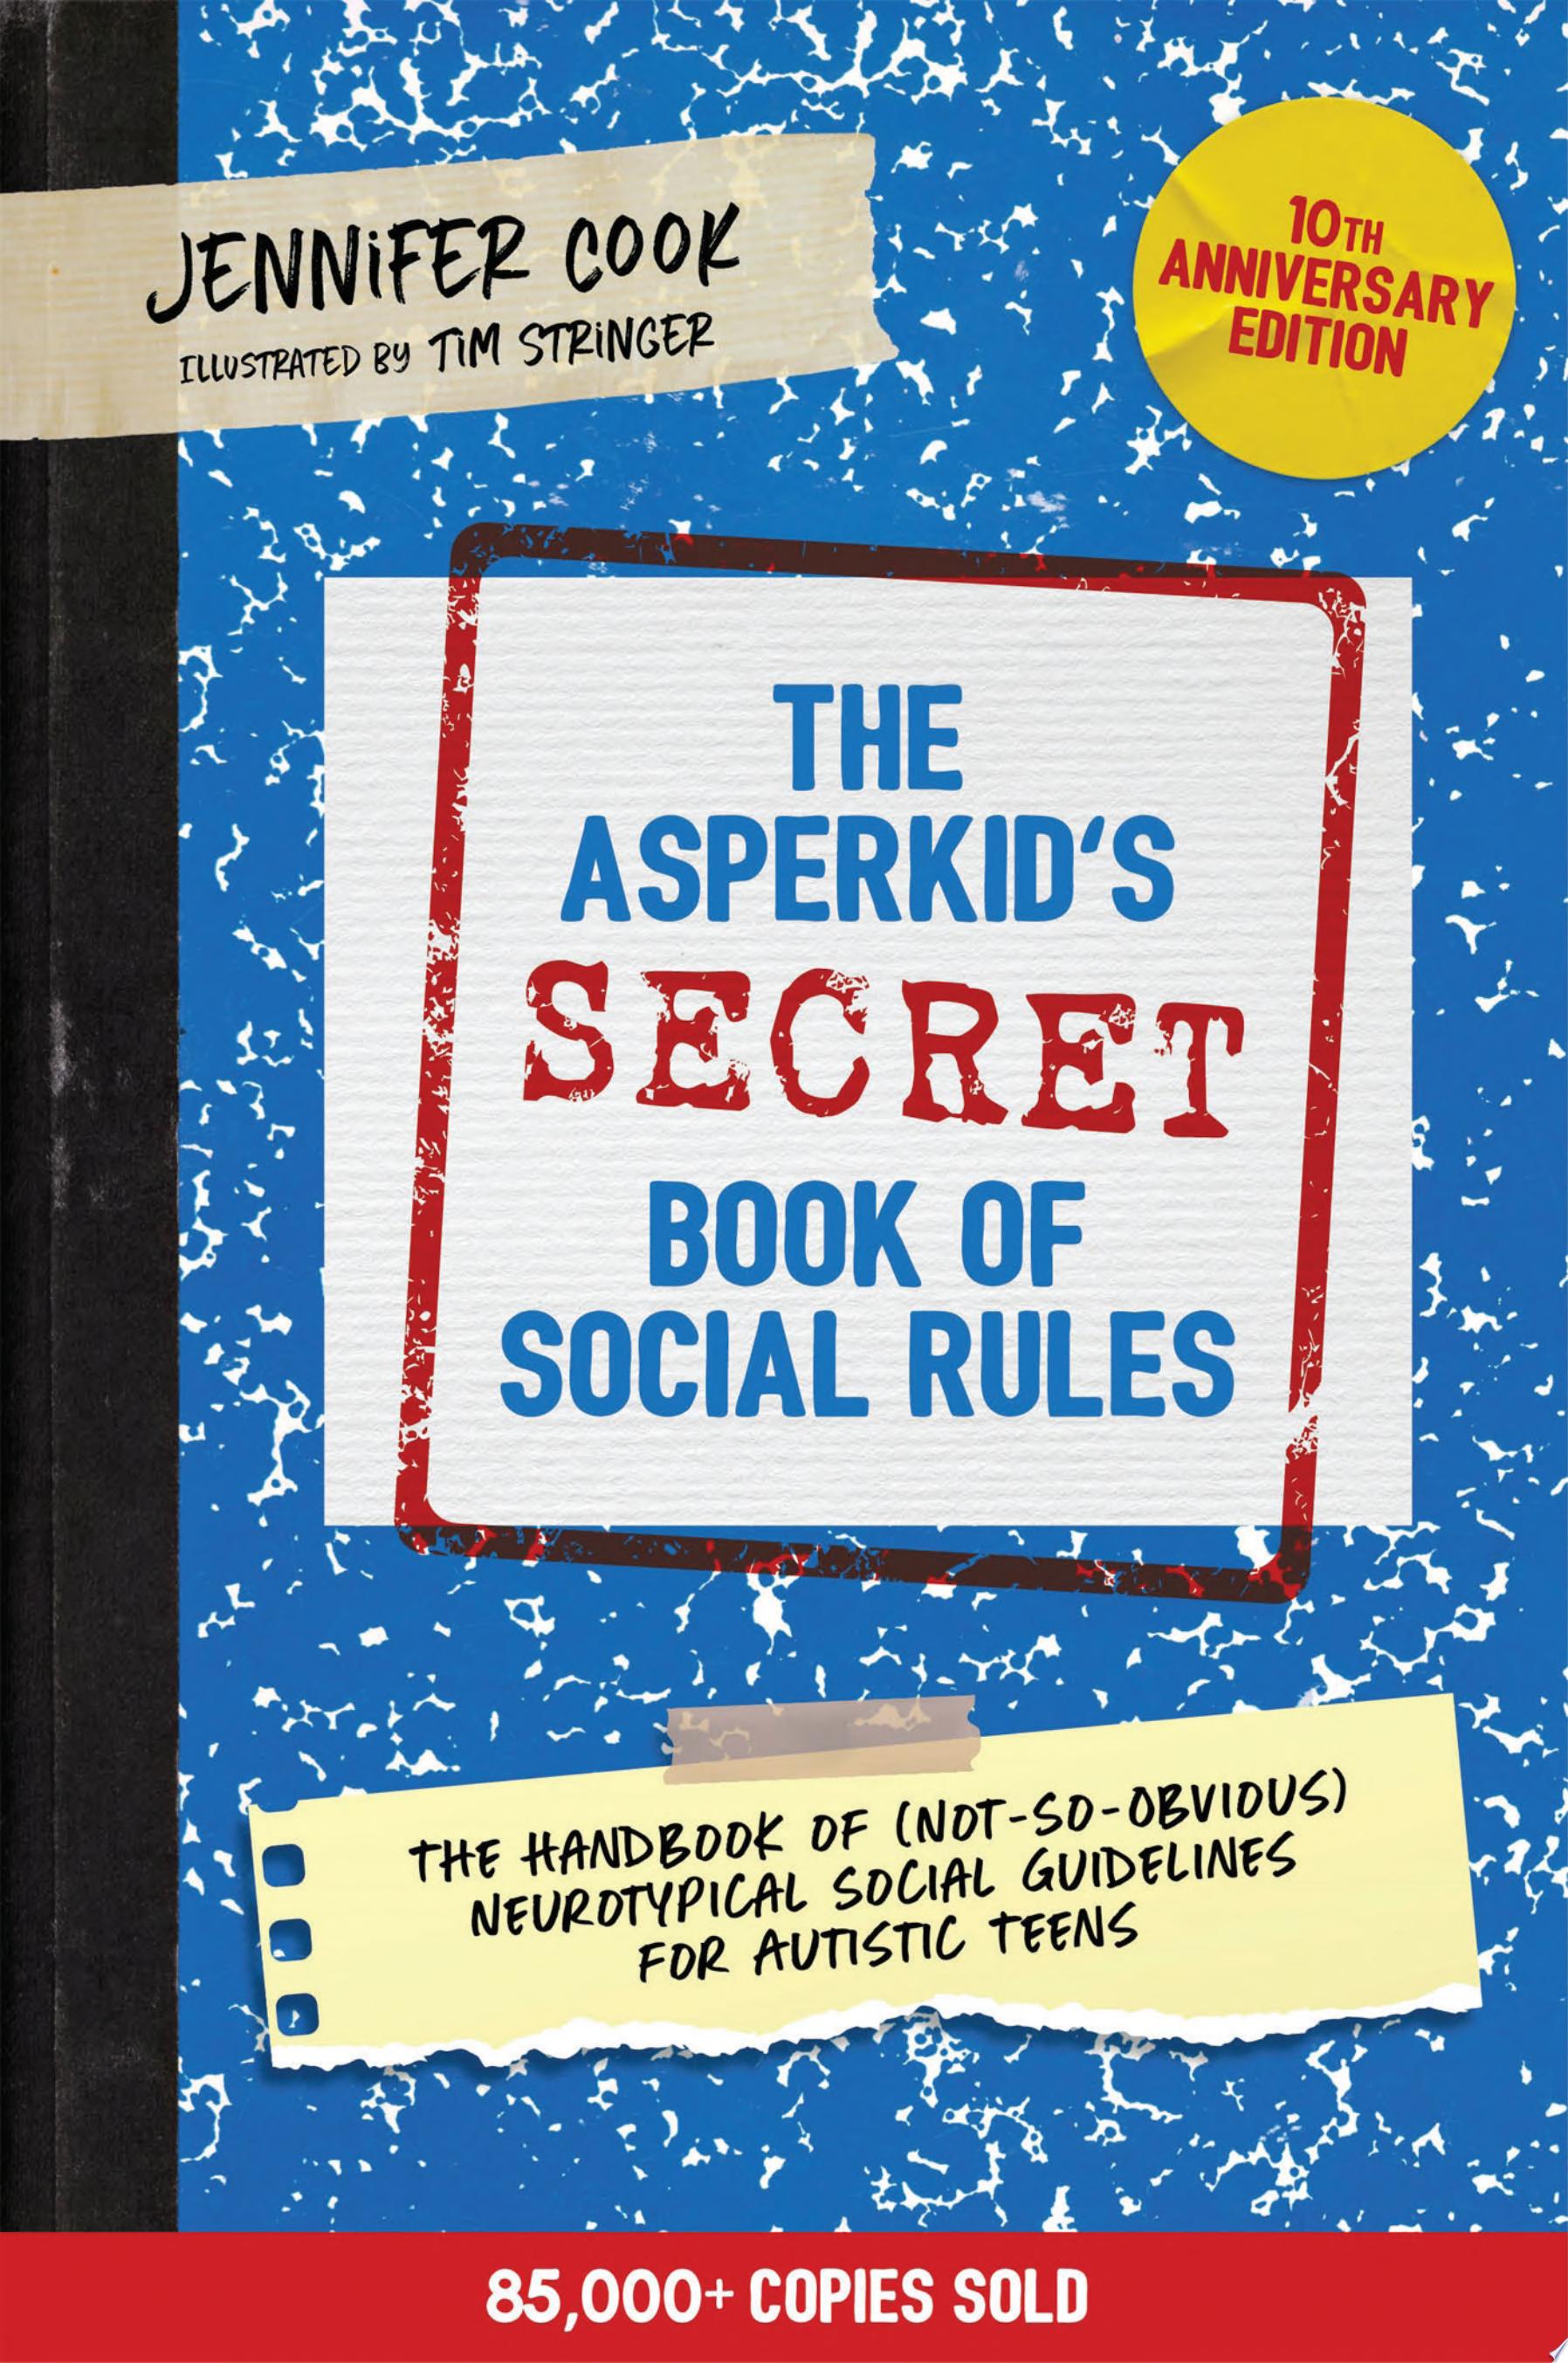 Image for "The Asperkid's (Secret) Book of Social Rules, 10th Anniversary Edition"